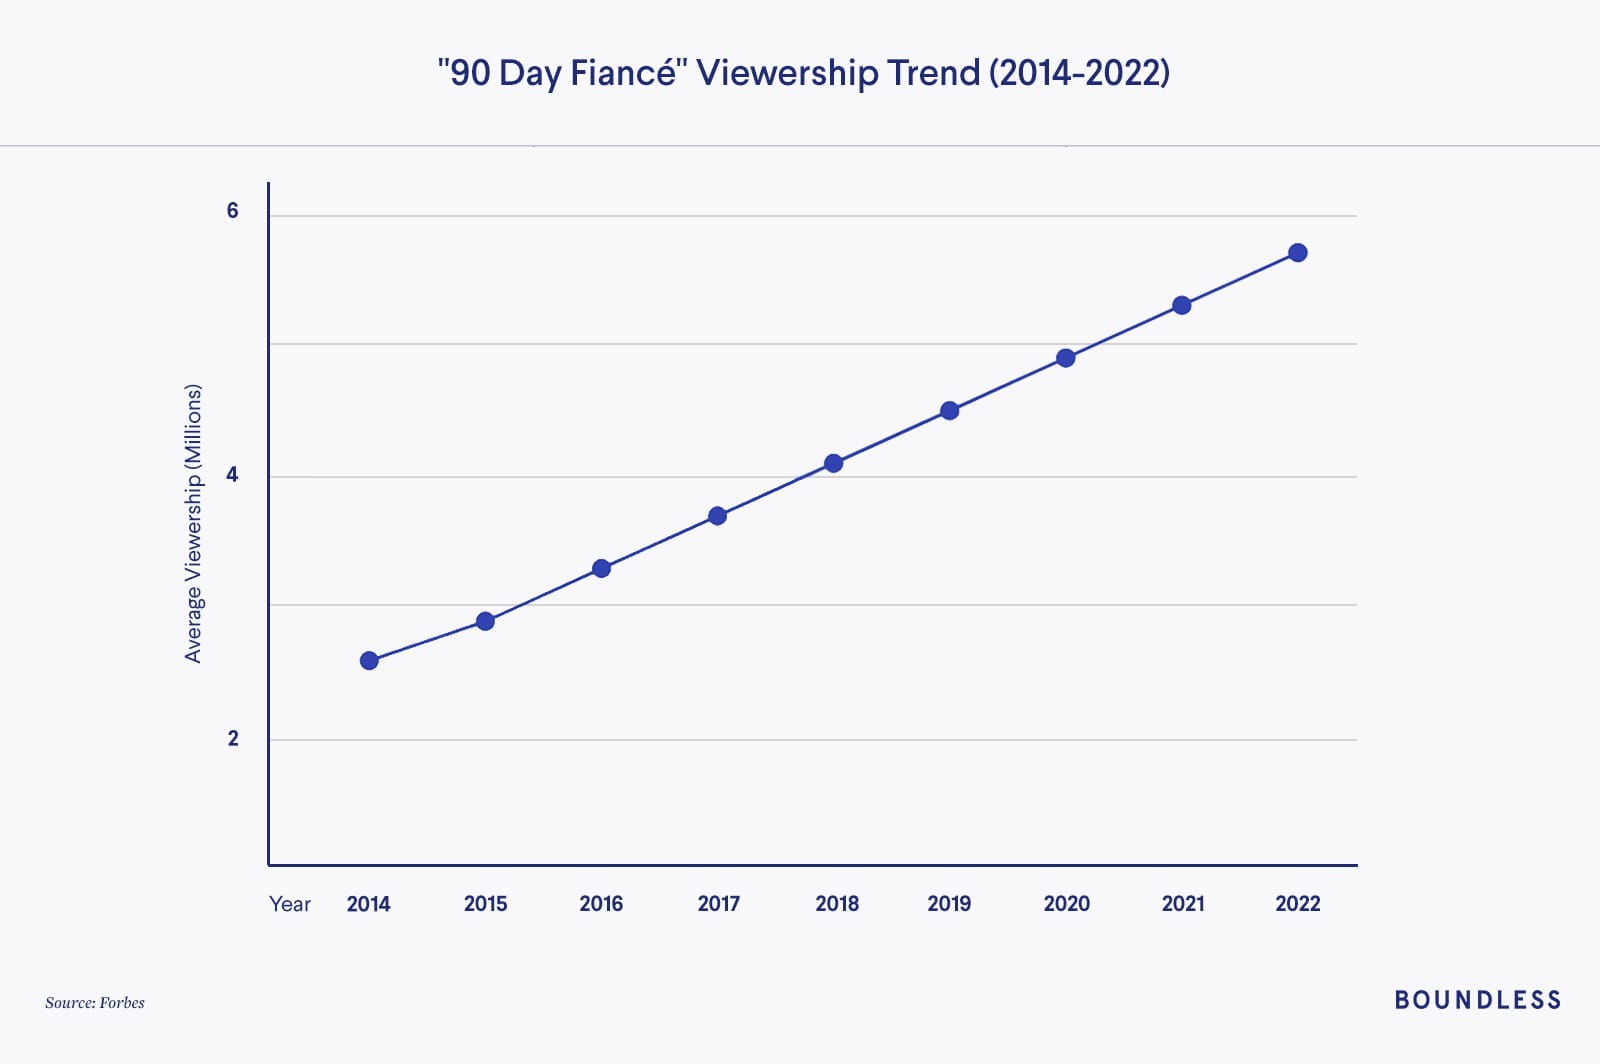 Chart showing 90-Day Fiance Viewership Trends